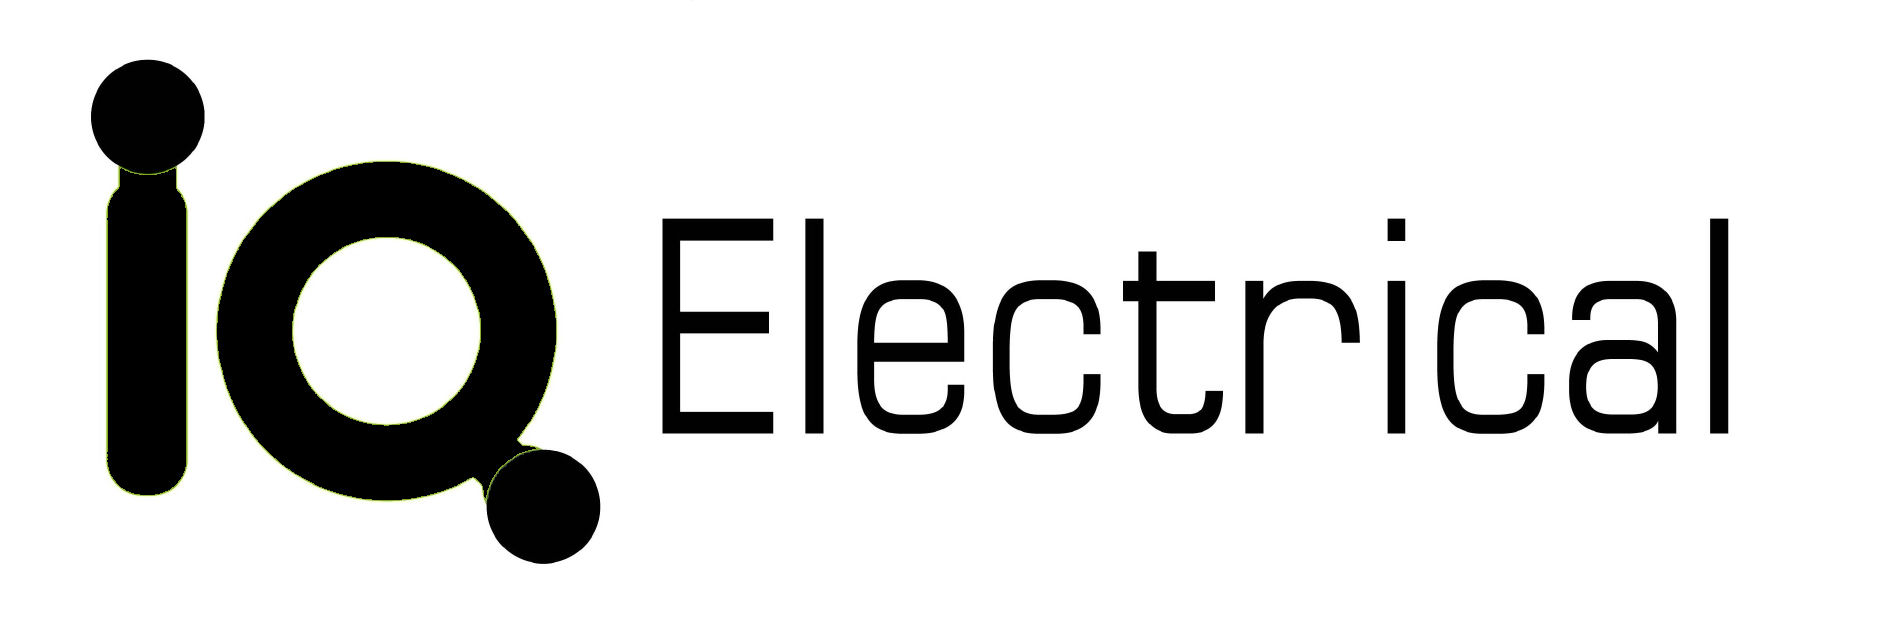 logo for IQ Electrical Limited